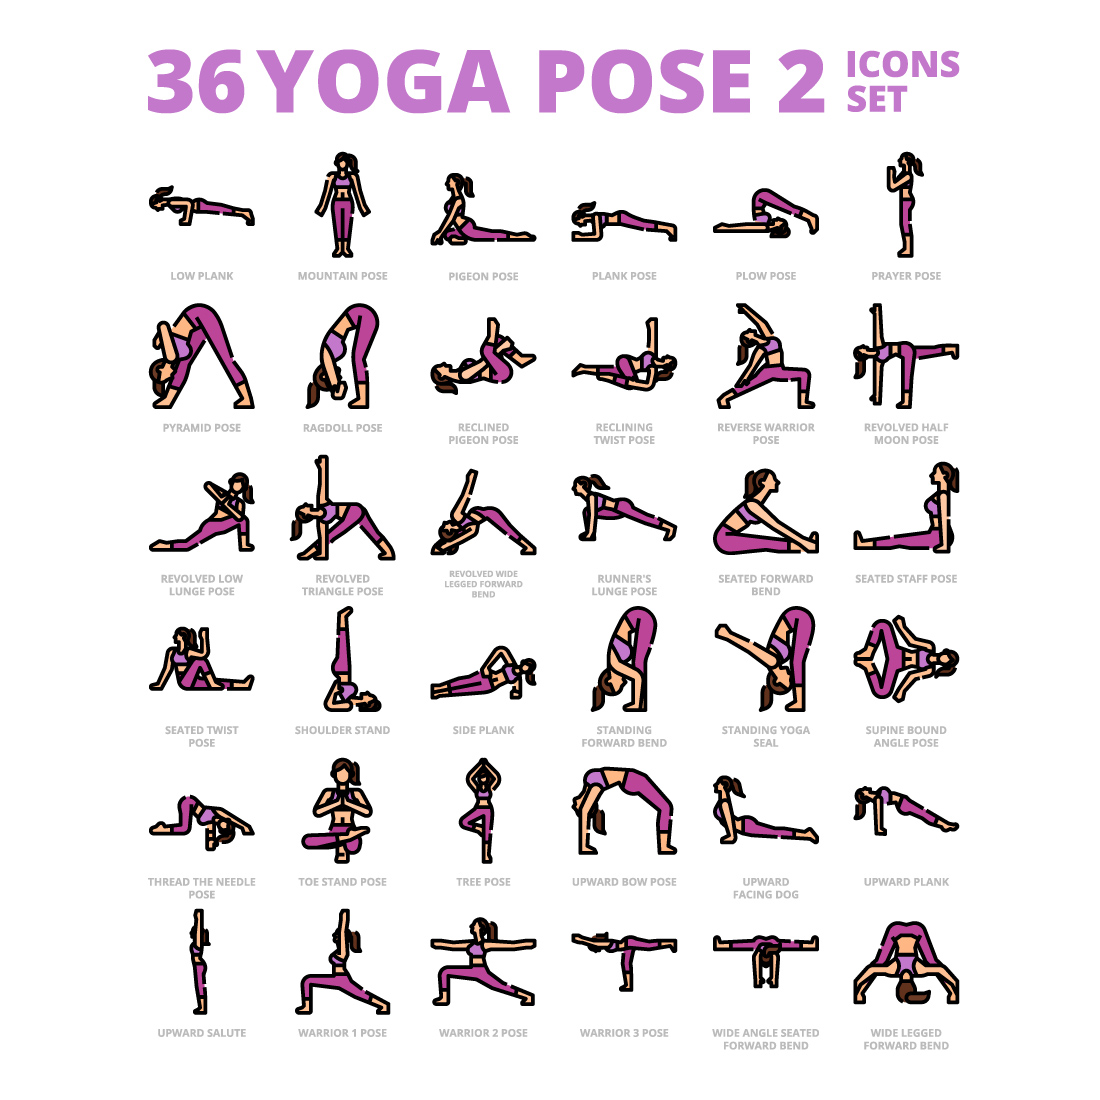 36 Yoga Post Icons Set x 4 Styles cover image.